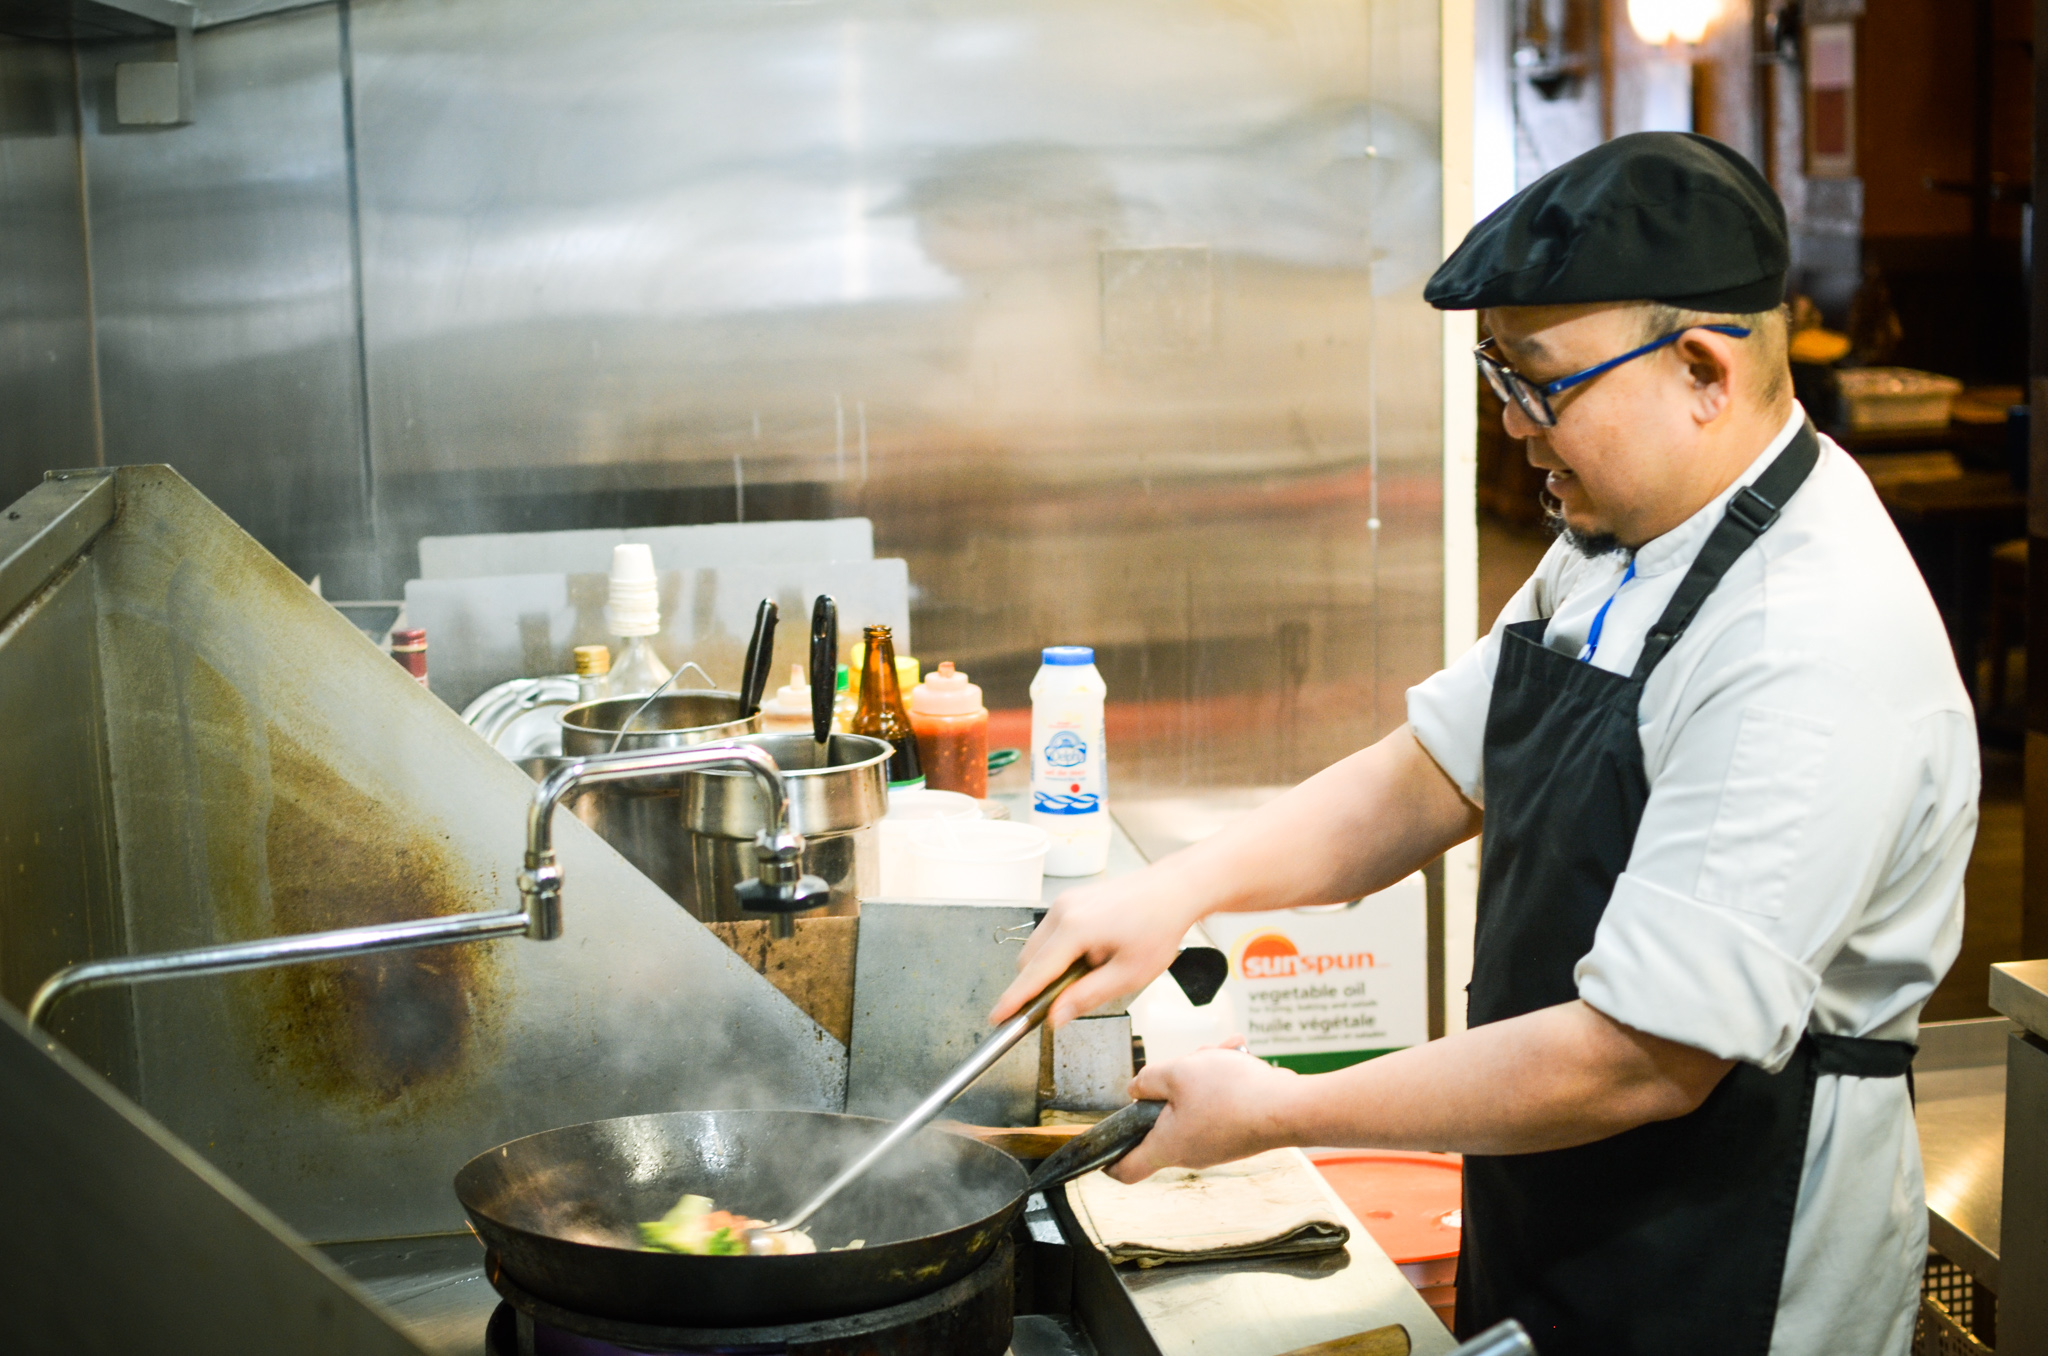 A man cooking food in a wok at a kitchen stove